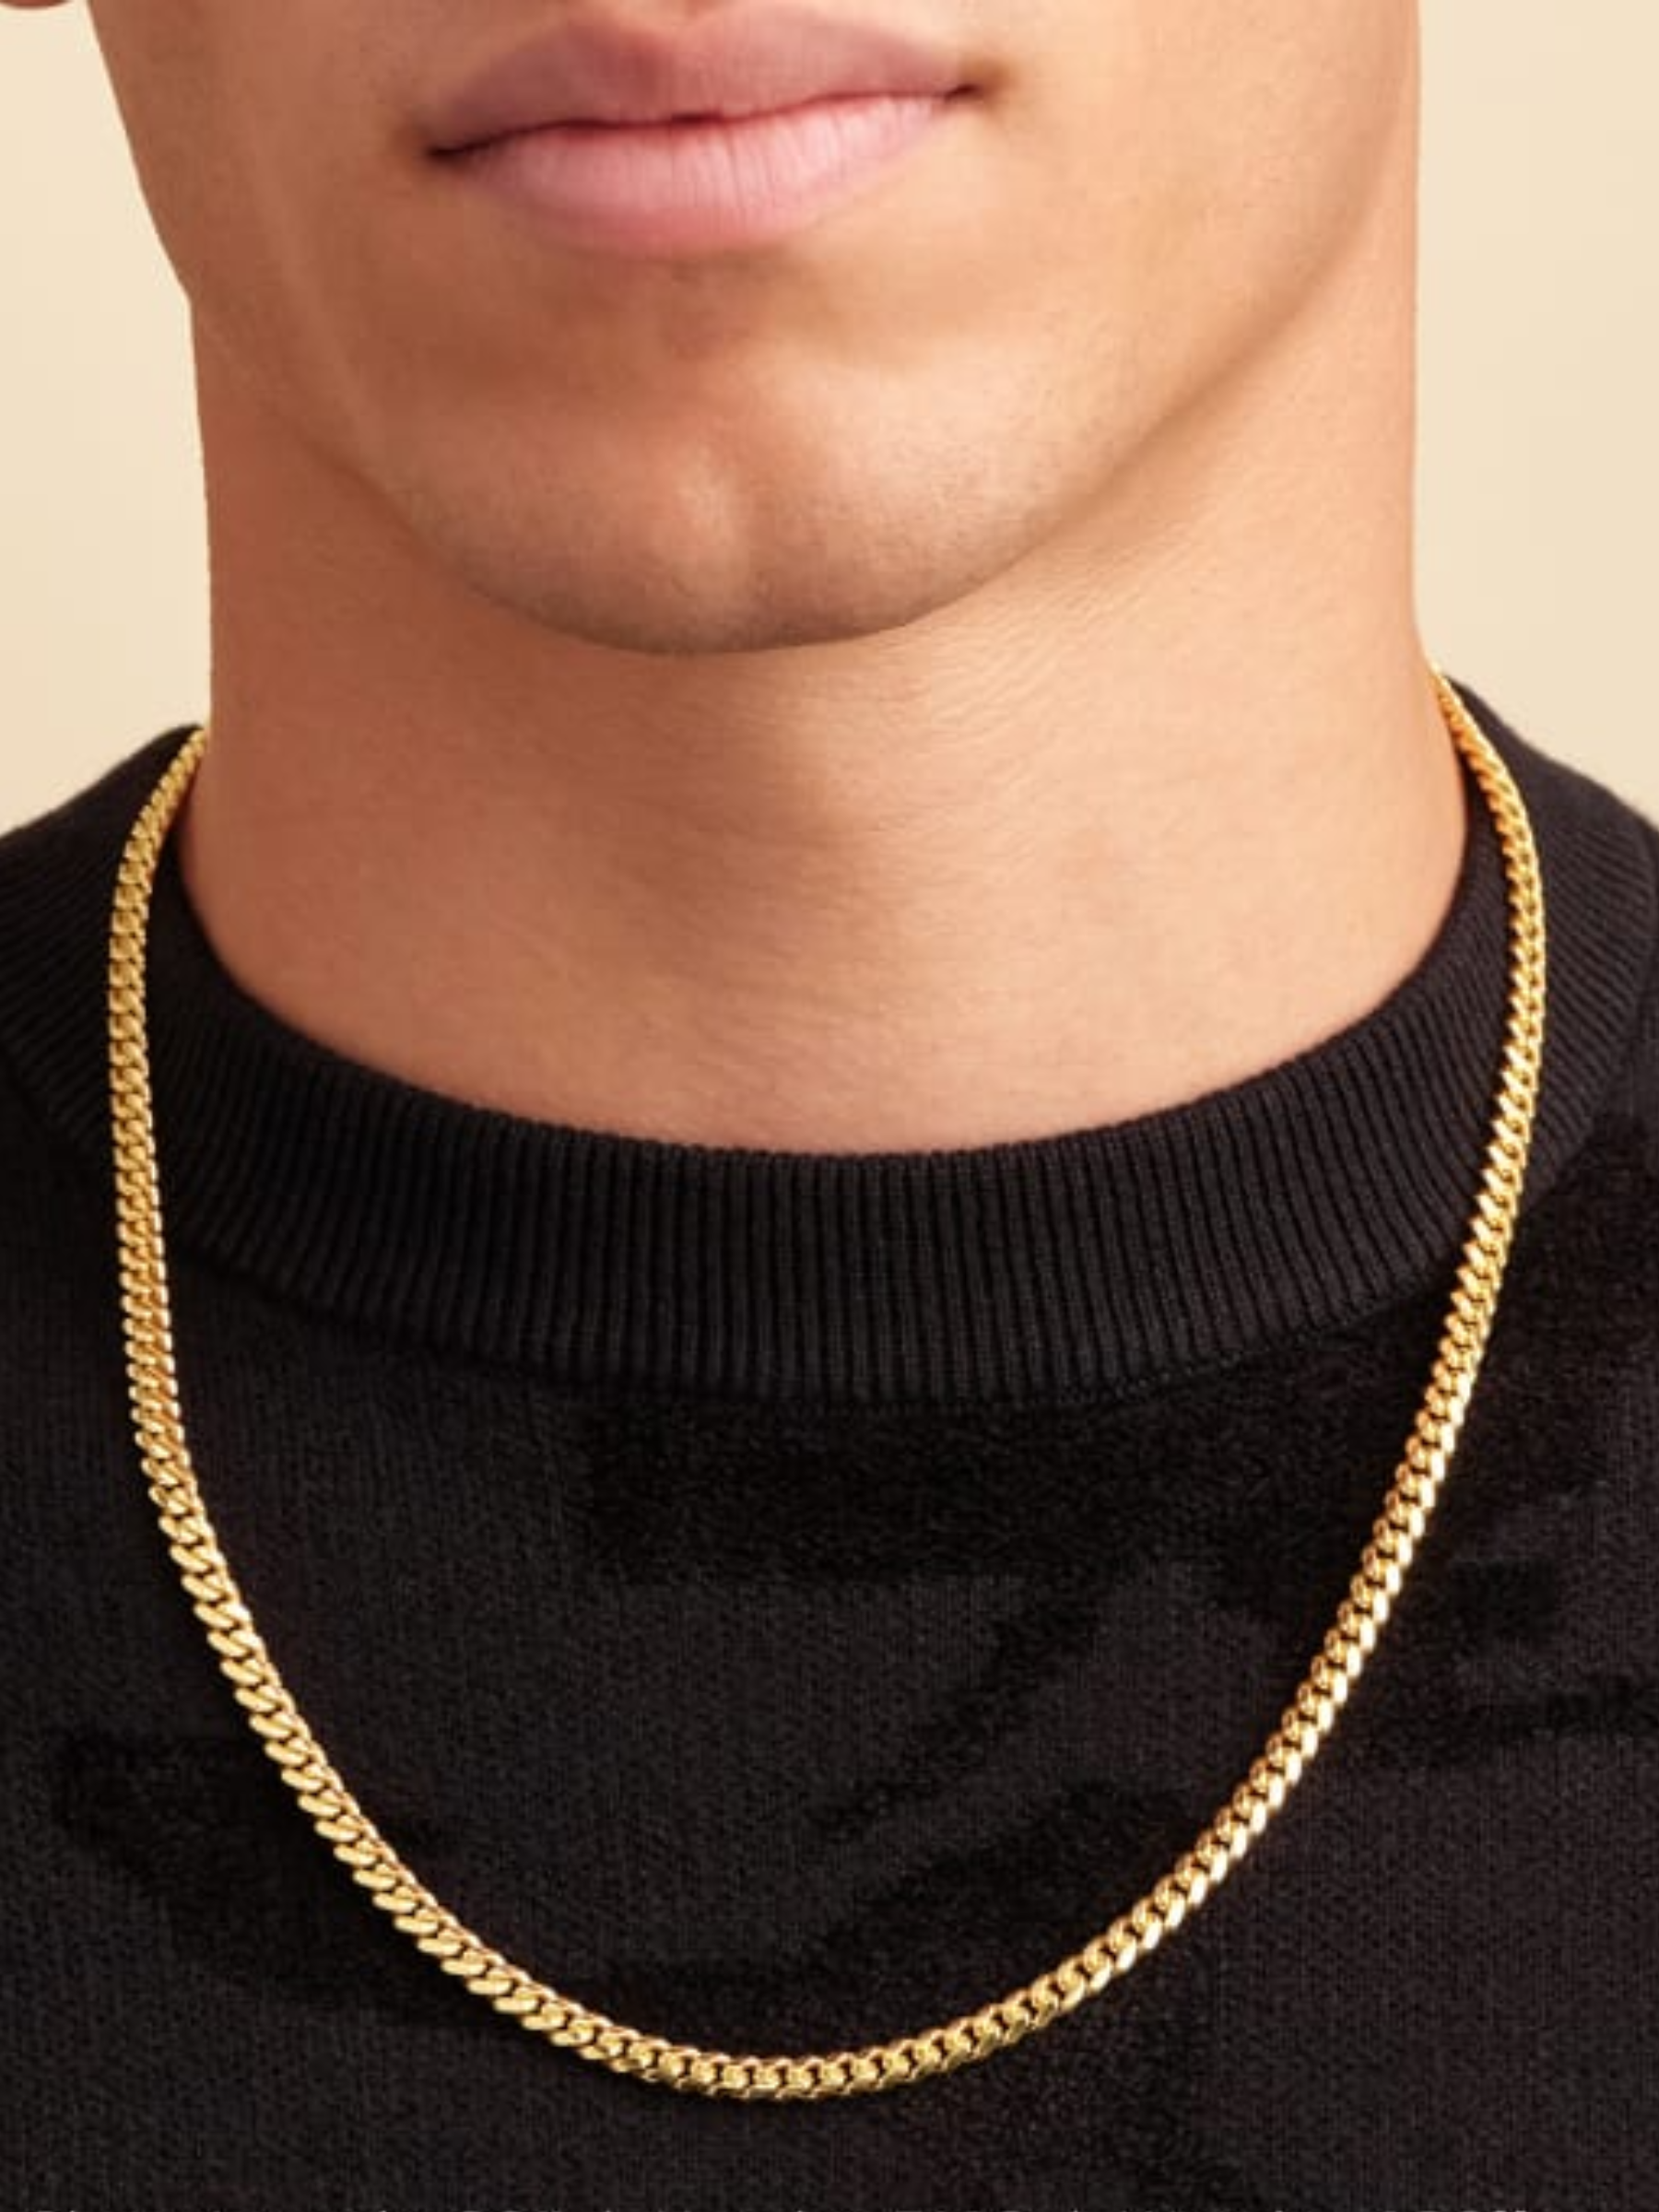 Elevate their drip with this classic Cuban link chain. It's simple enough to wear with any outfit, and a great starter piece to a growing jewelry collection. Every teen could use a little bling for their next selfie. $179, Jaxxon. <a href="https://jaxxon.com/products/cuban-link-chain-5mm-gold?">Get it now!</a><p>Sign up for today’s biggest stories, from pop culture to politics.</p><a href="https://www.glamour.com/newsletter/news?sourceCode=msnsend">Sign Up</a>